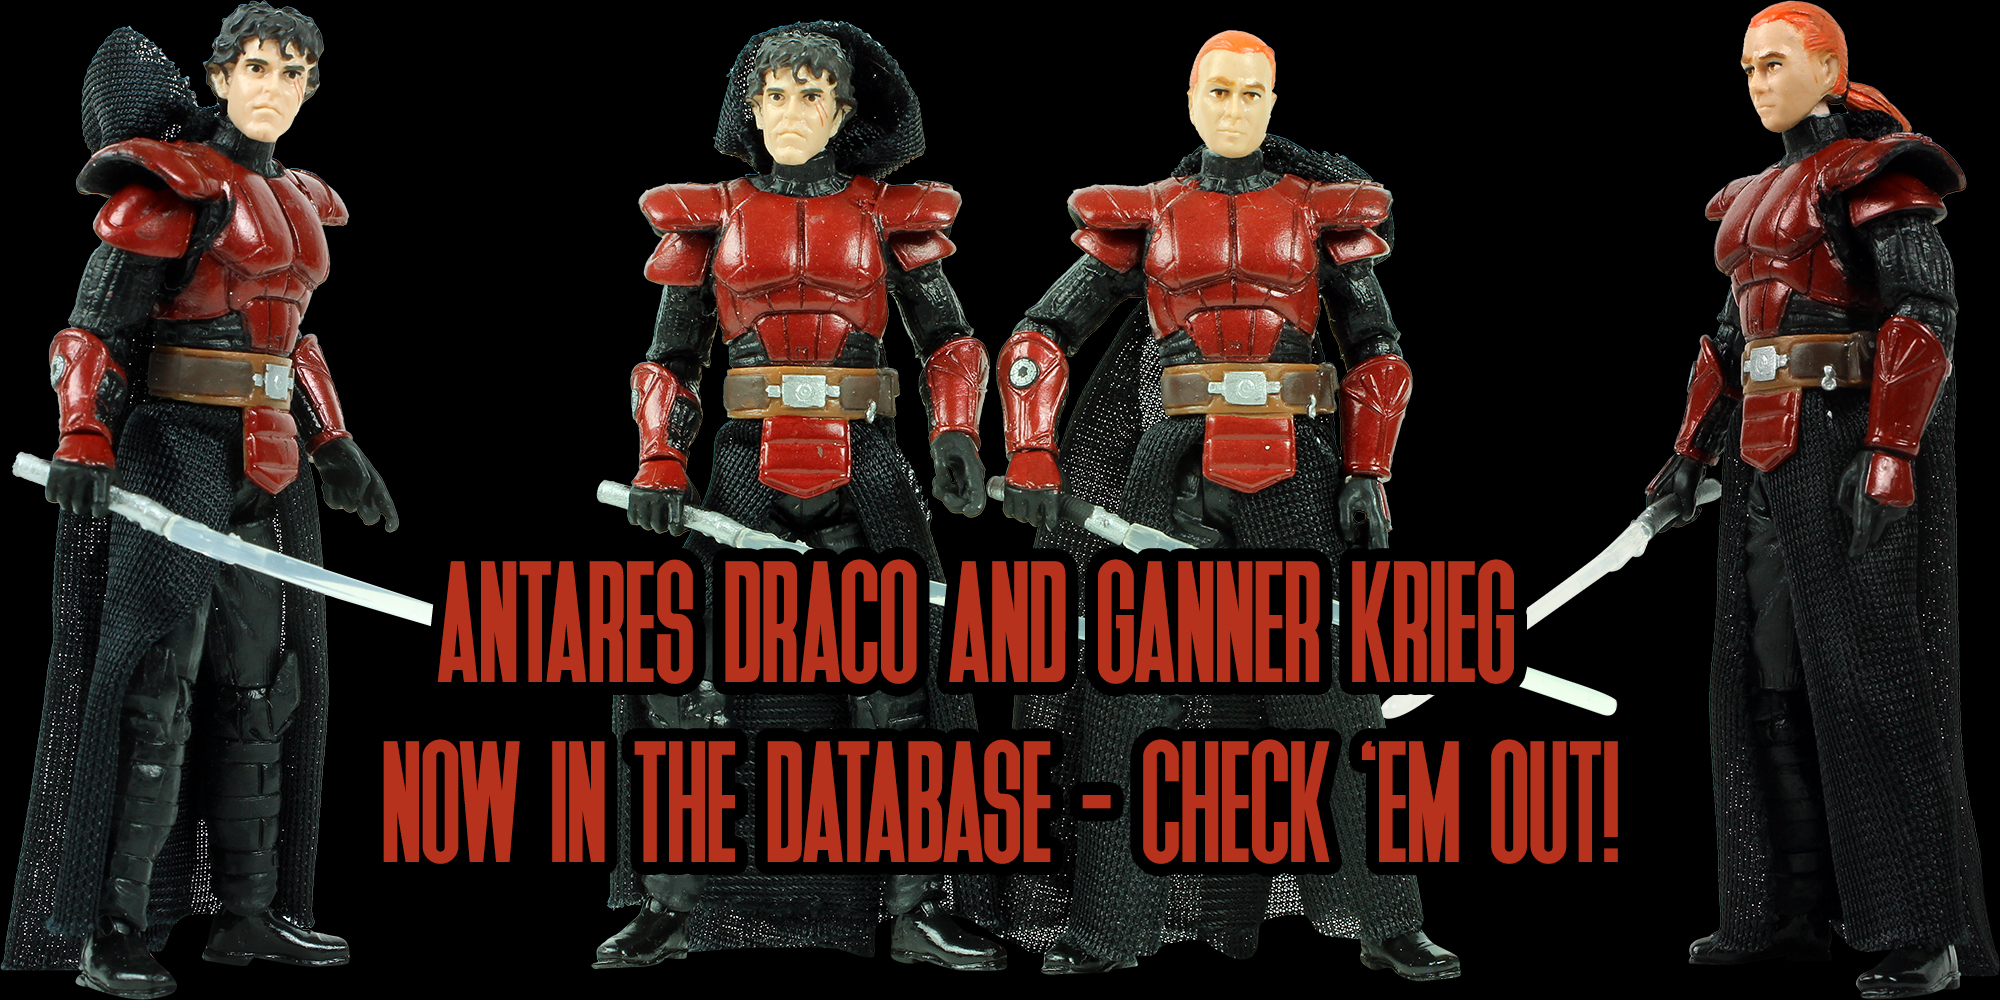 New In The Database: Antares Draco And Ganner Krieg